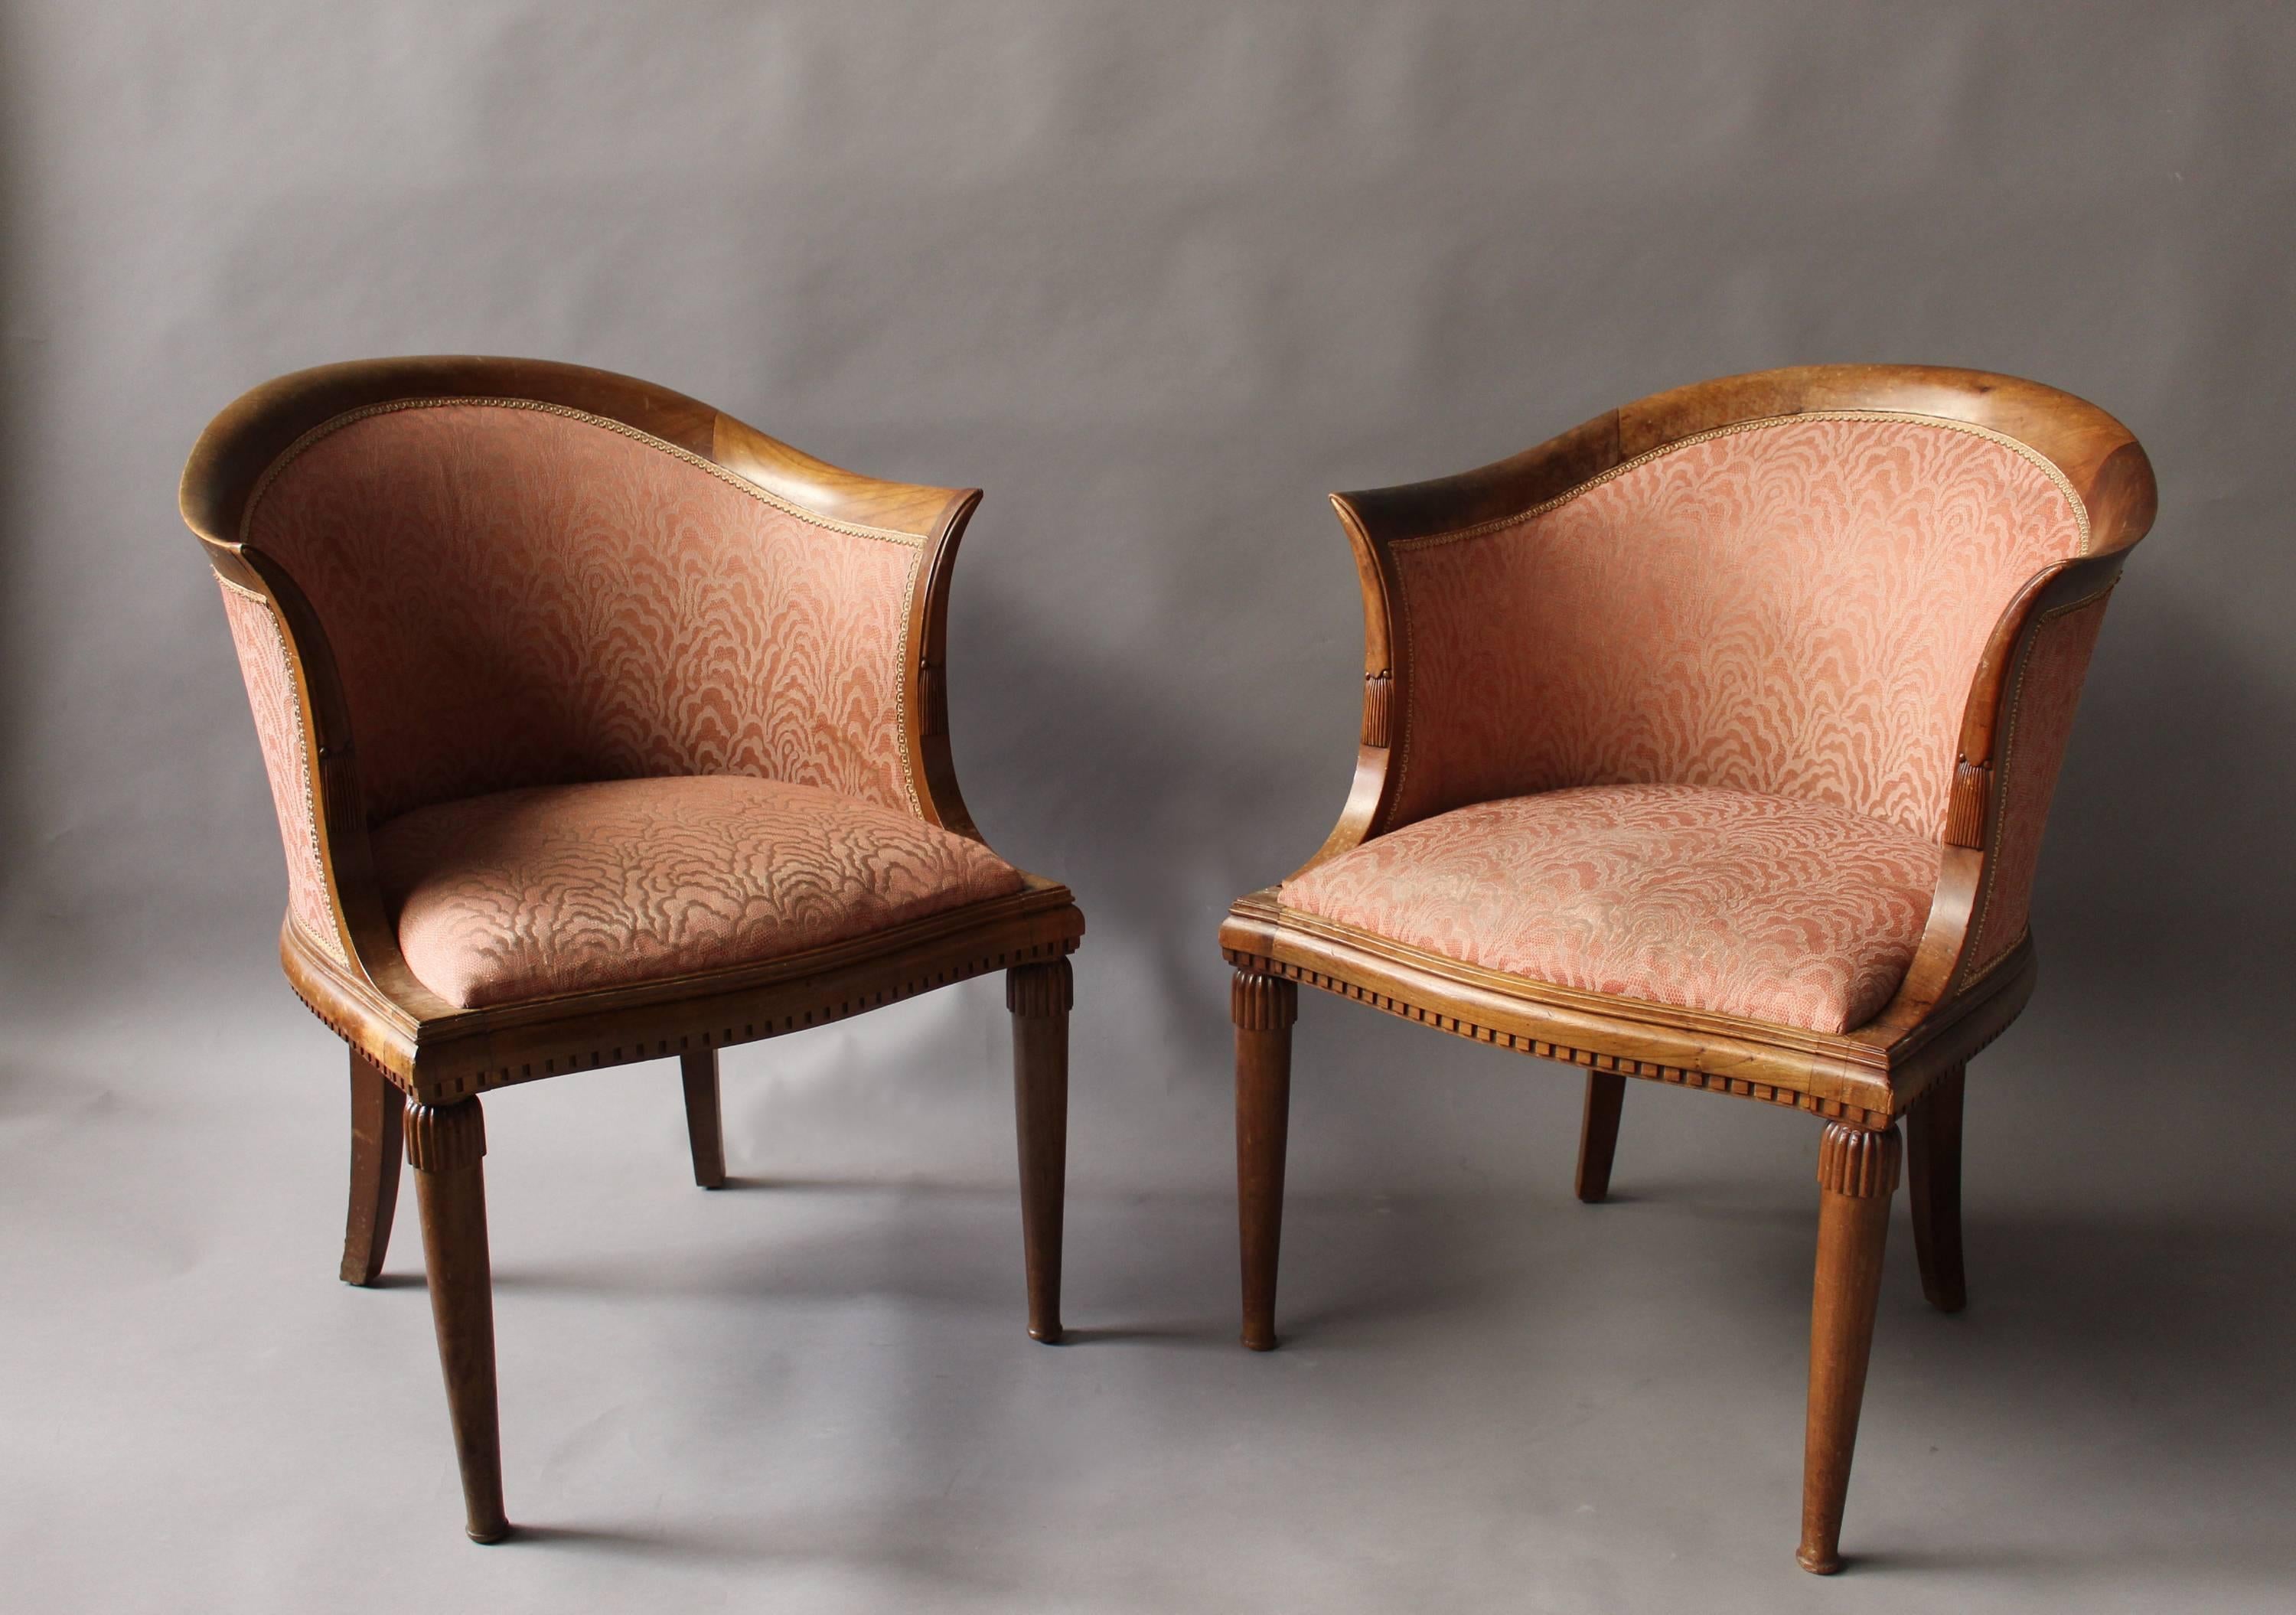 Pair of Fine French Art Deco mahogany armchairs in the manner of Maurice Dufrene, circa 1925.